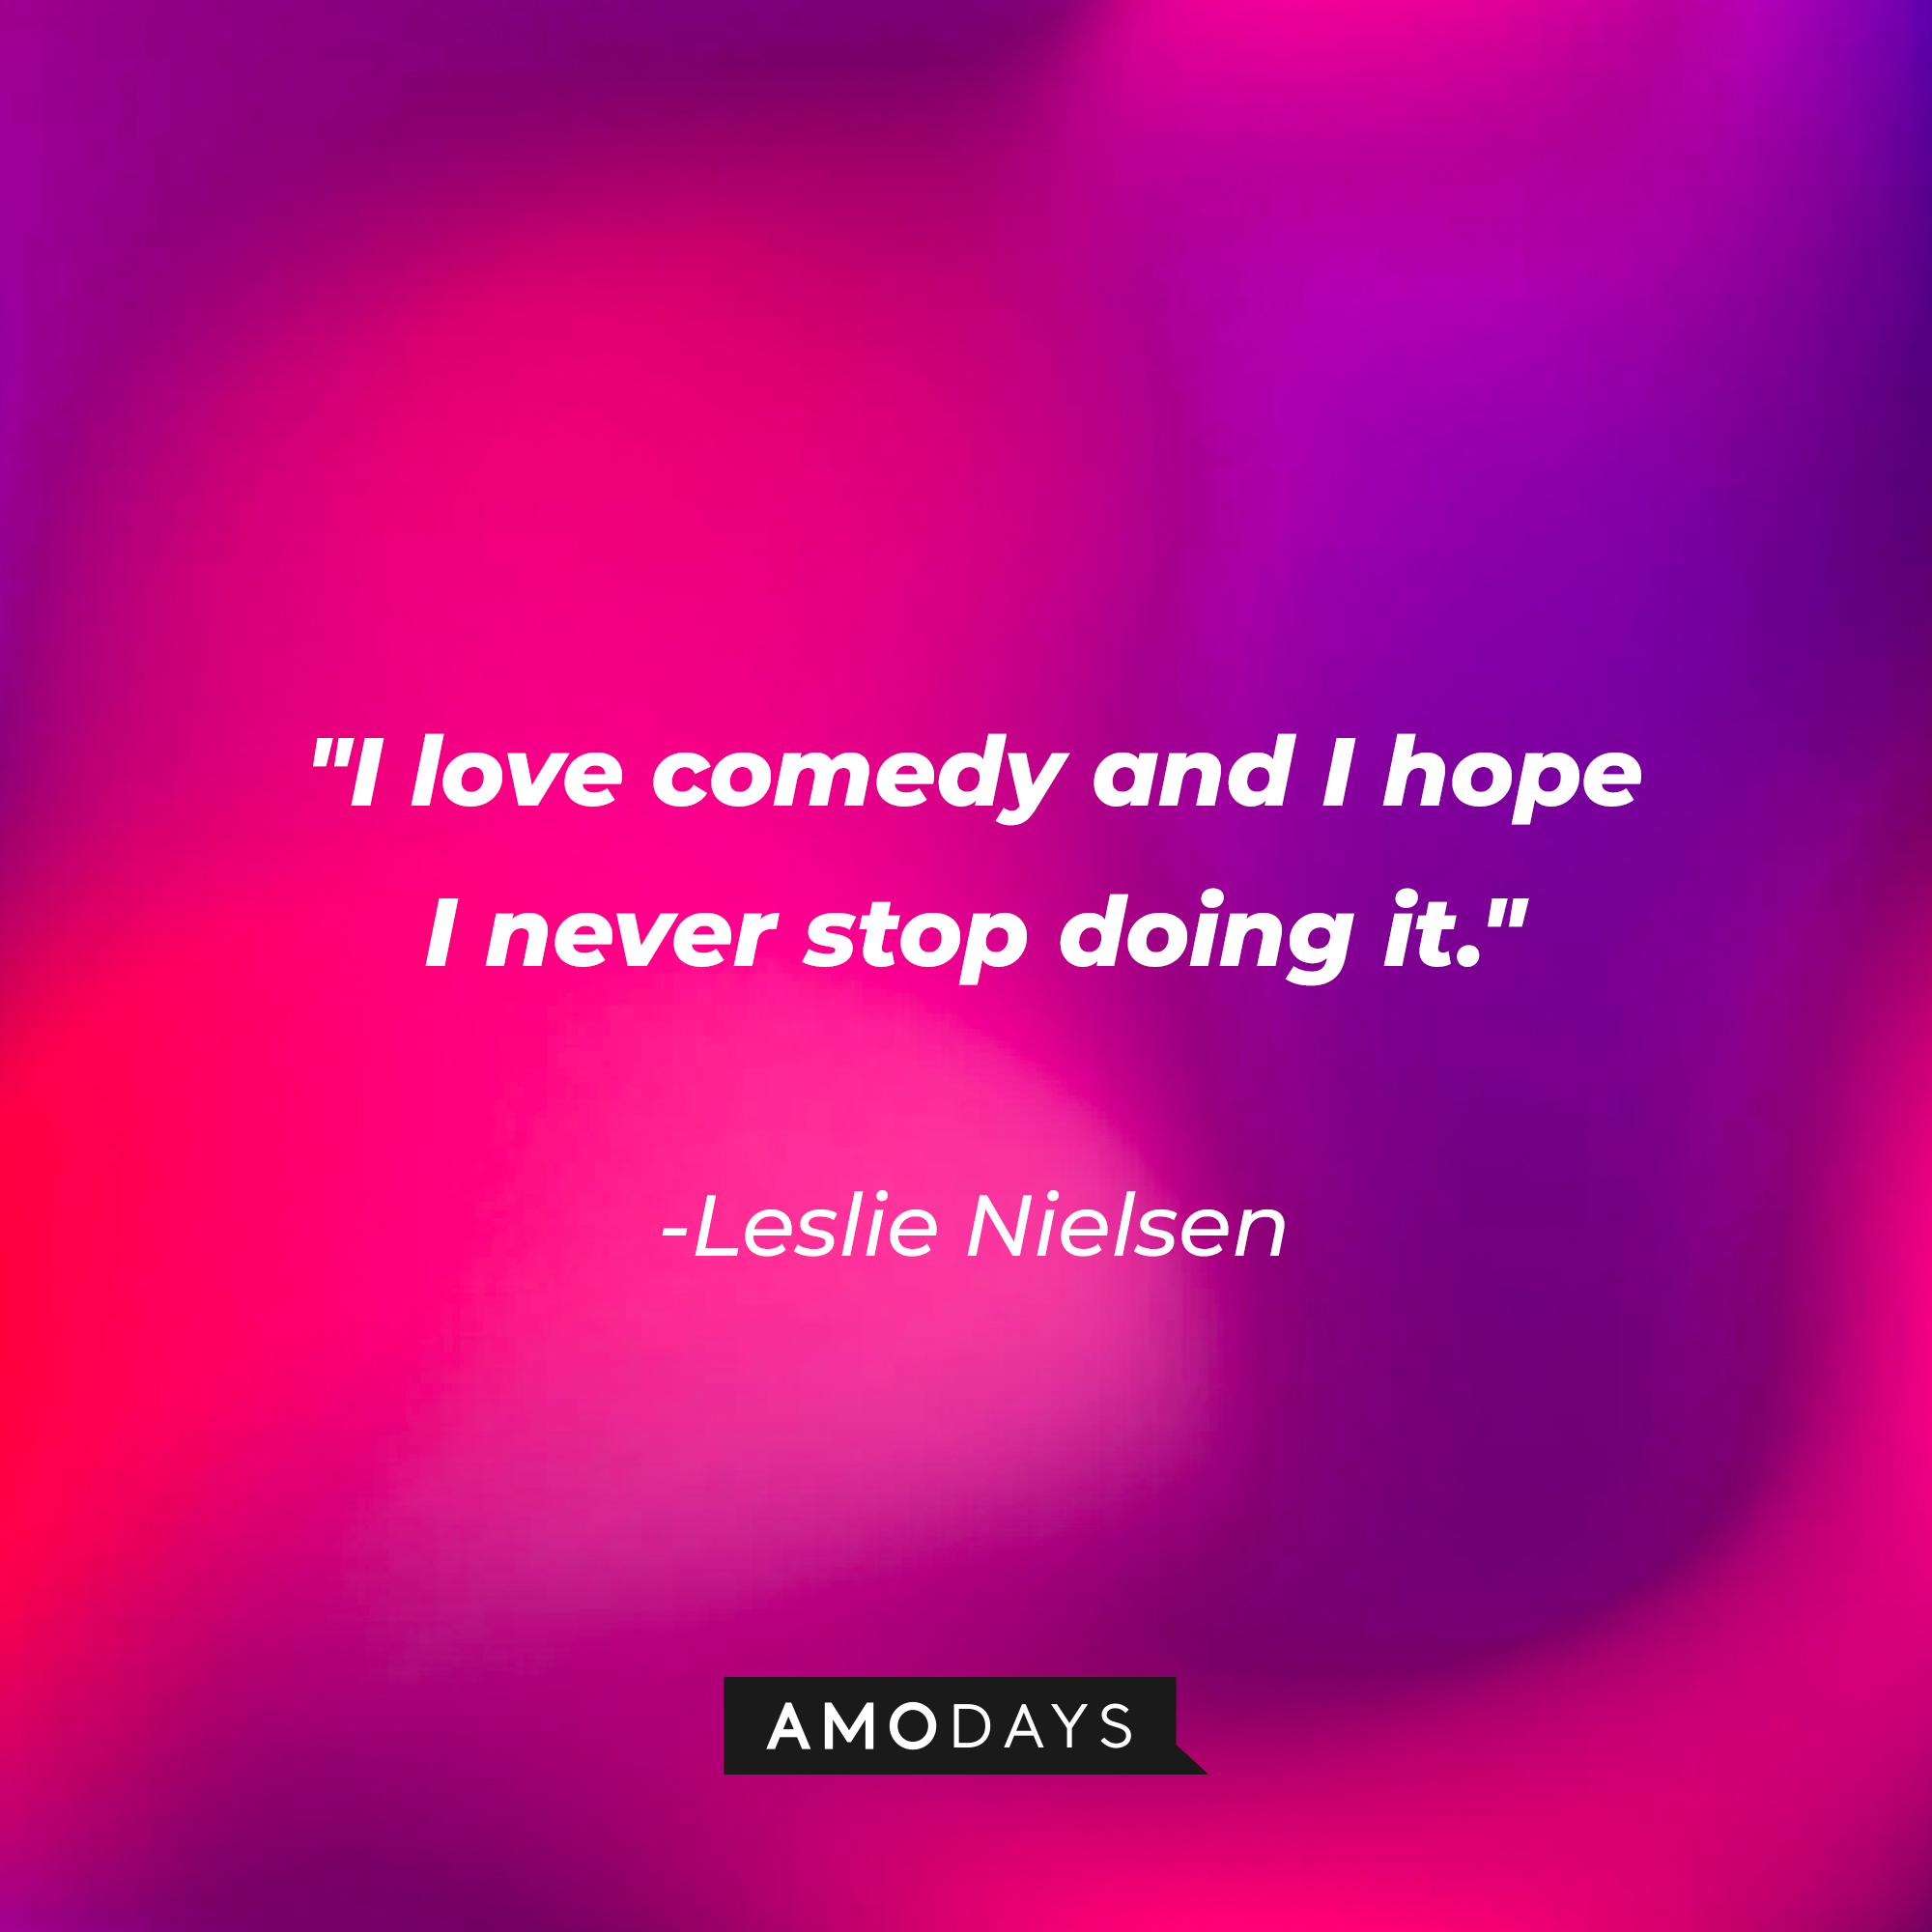 Leslie Nielsen's quote: "I love comedy and I hope I never stop doing it." | Source: Amodays